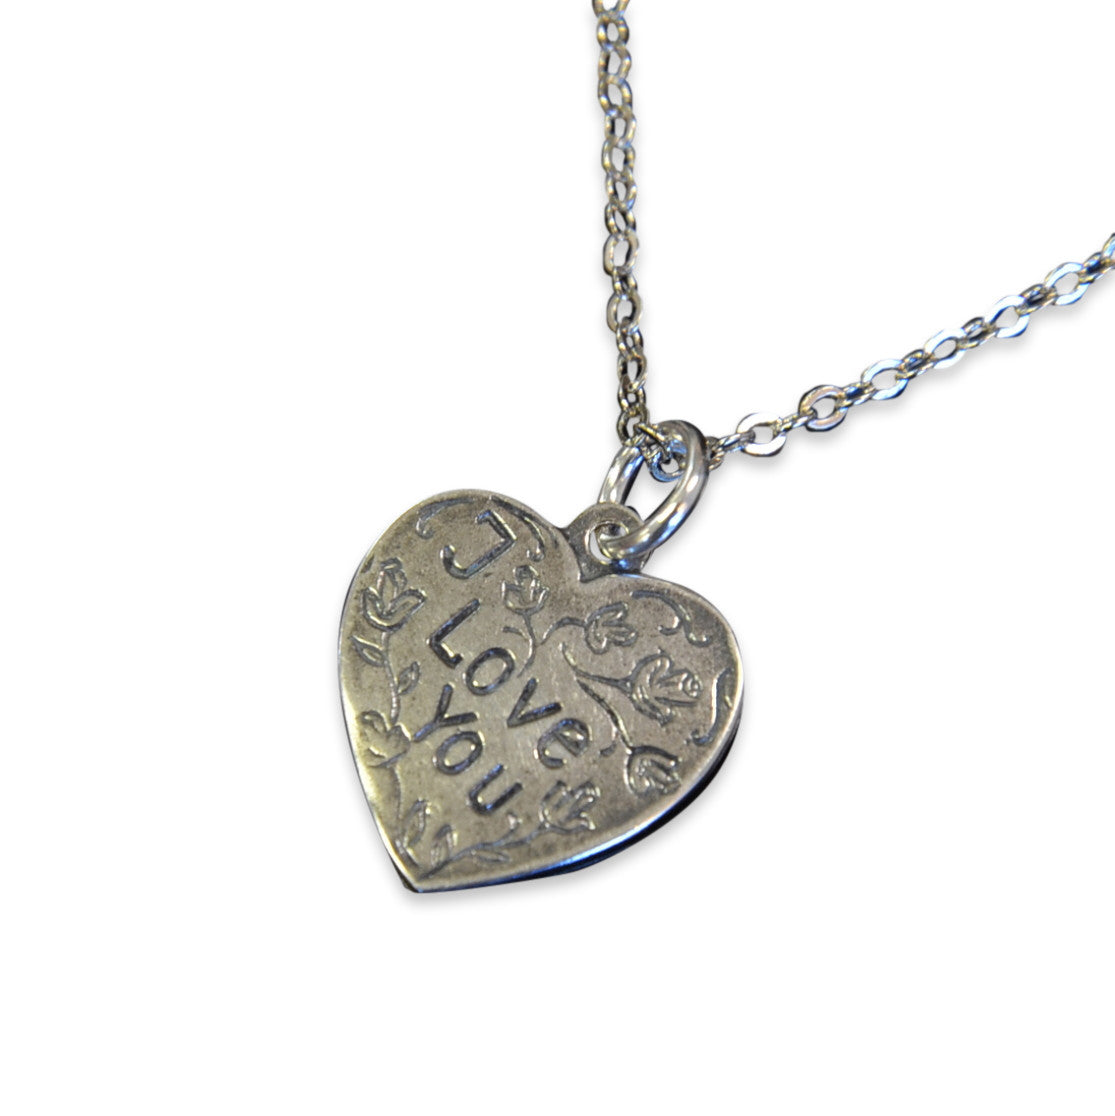 I Love You Vintage Heart Necklace Heart Charm Silver Necklace Vintage Trench Art - Gwen Delicious Jewelry Designs